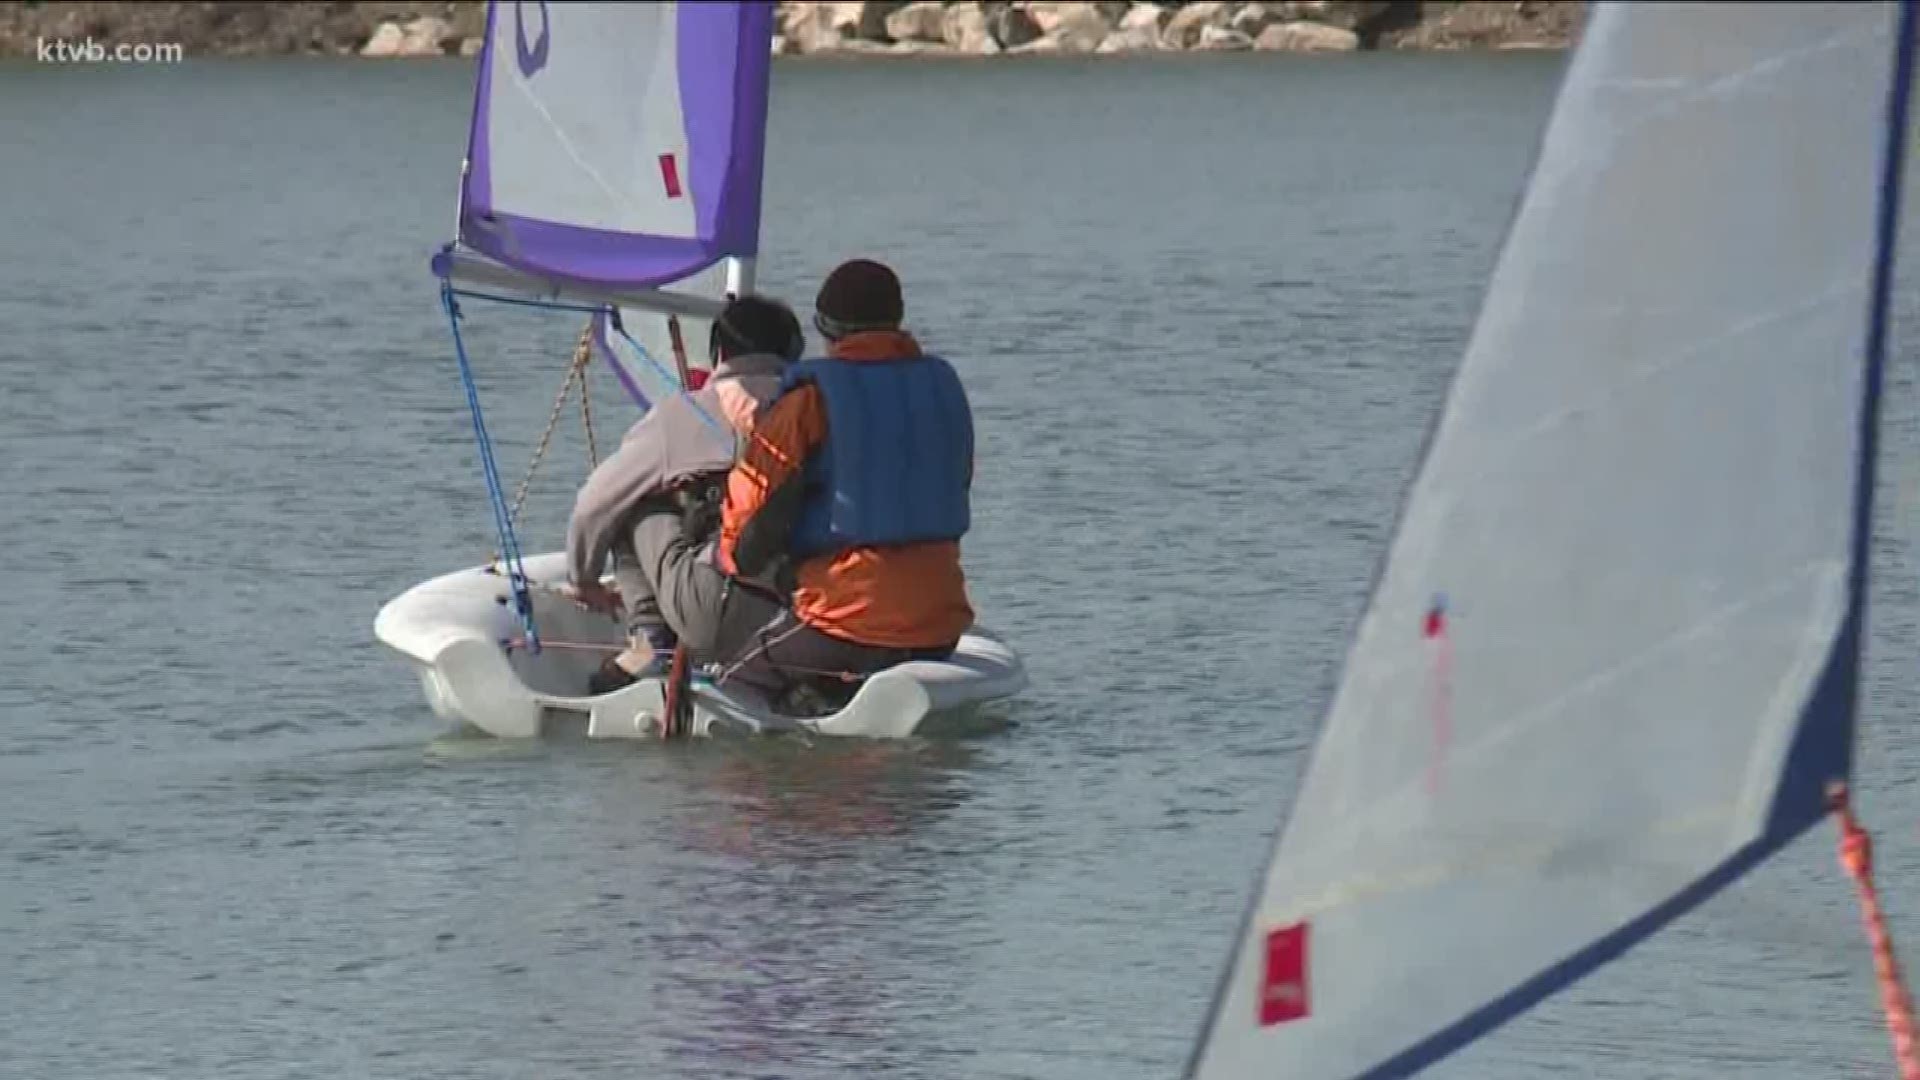 Learn to sail program for children this summer